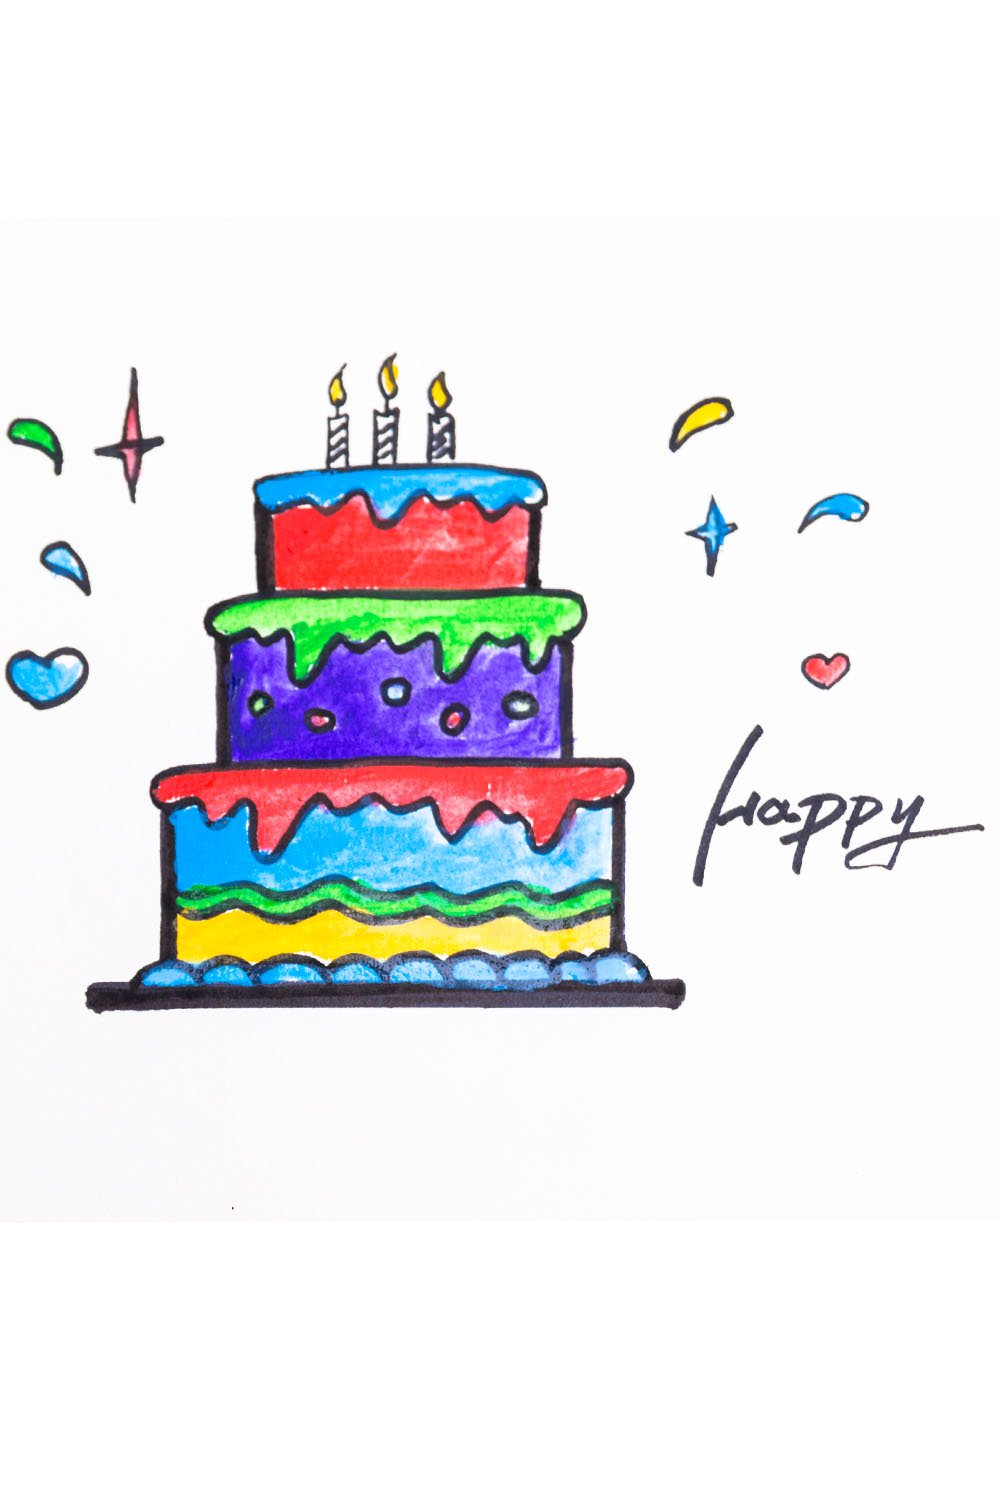 How to draw a birthday cake - how to draw